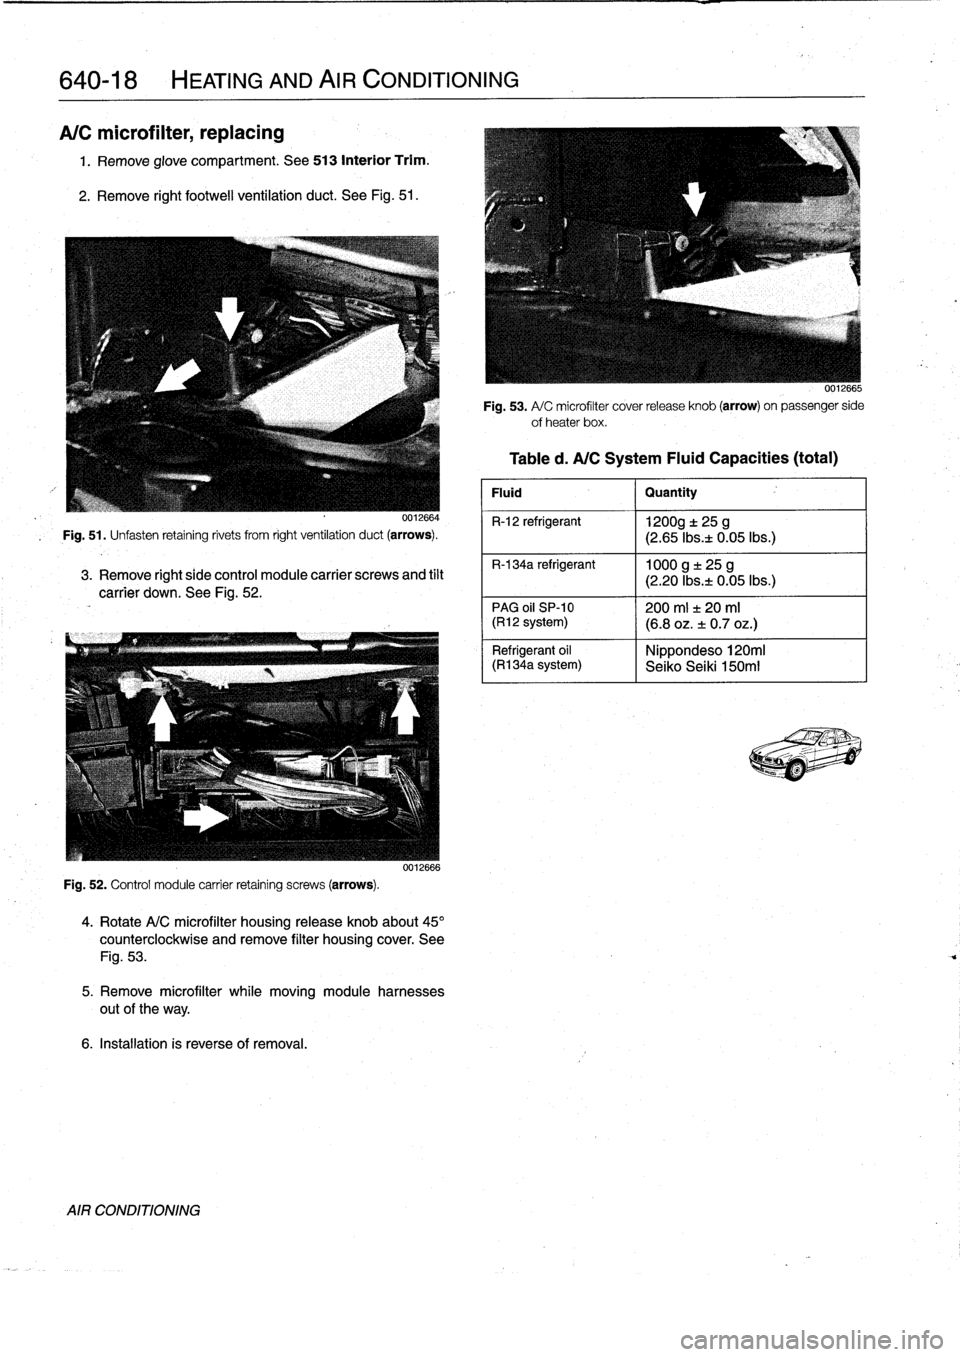 BMW 323i 1995 E36 Workshop Manual 
640-18

	

HEATING
AND
AIR
CONDITIONING

A/C
microfilter,
replacing

1
.
Remove
glove
compartment
.
See
513
Interior
Trim
.

2
.
Remove
right
footwell
ventilation
duct
.
See
Fig
.
51
.

0012664

Fig
